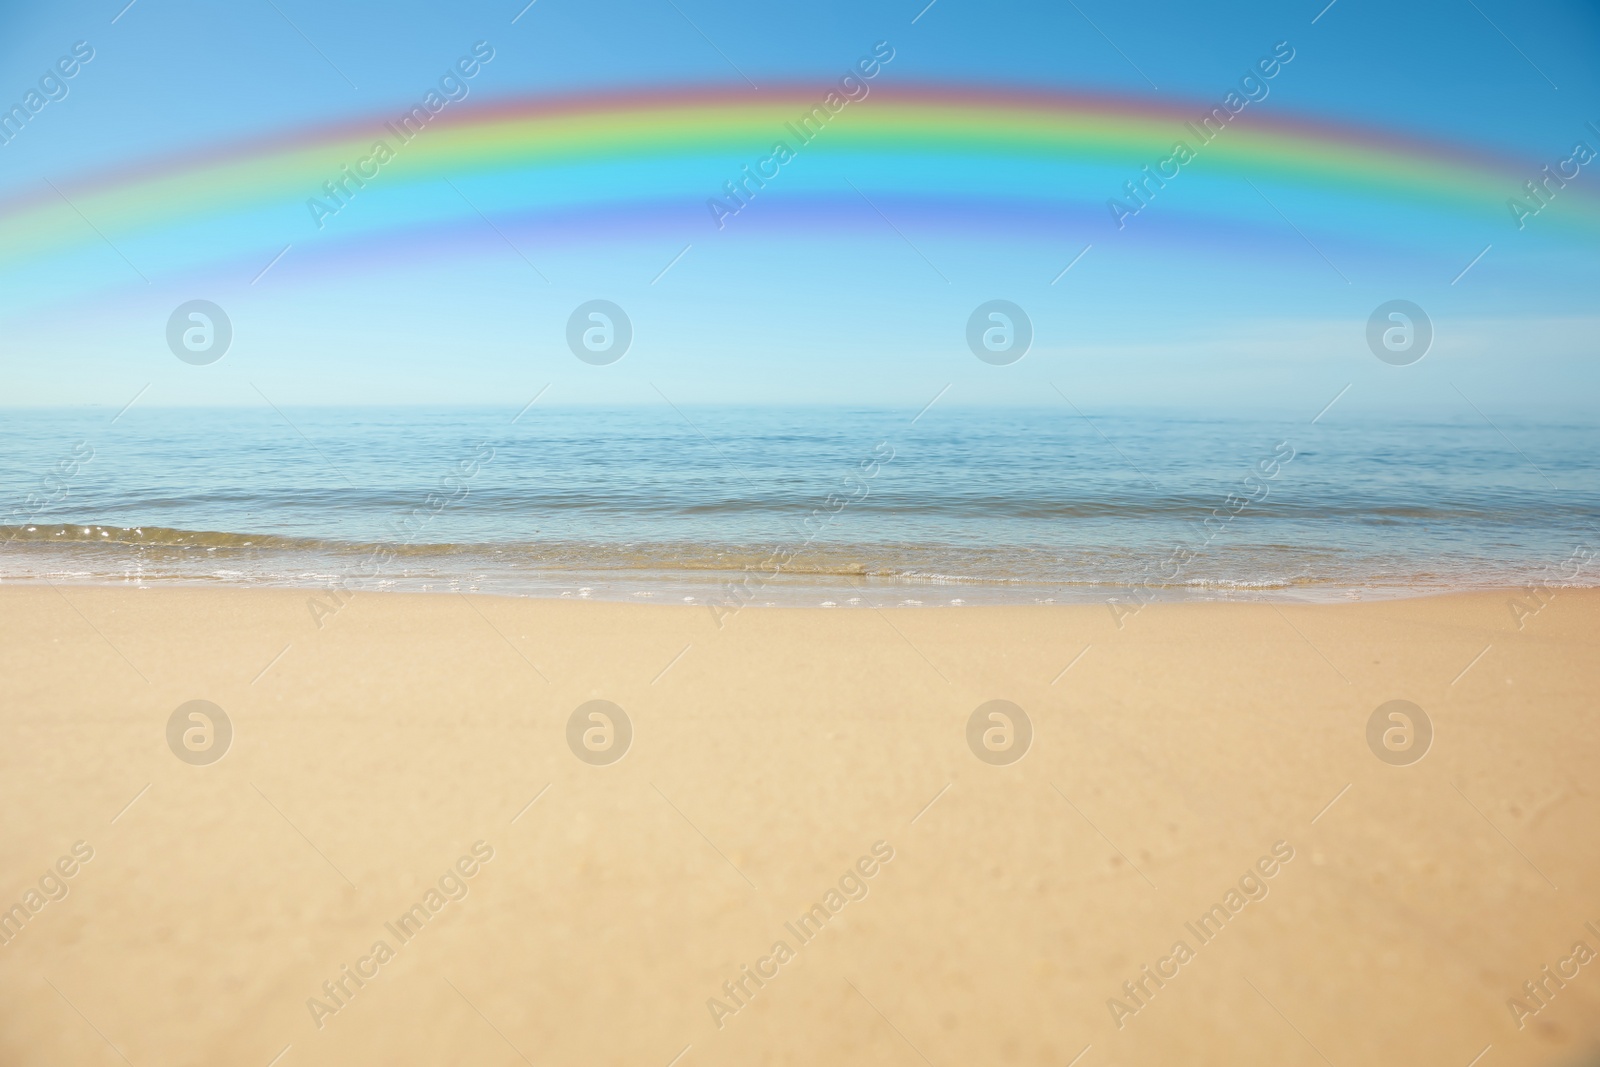 Image of Beautiful rainbow in blue sky over sandy beach and sea on sunny day